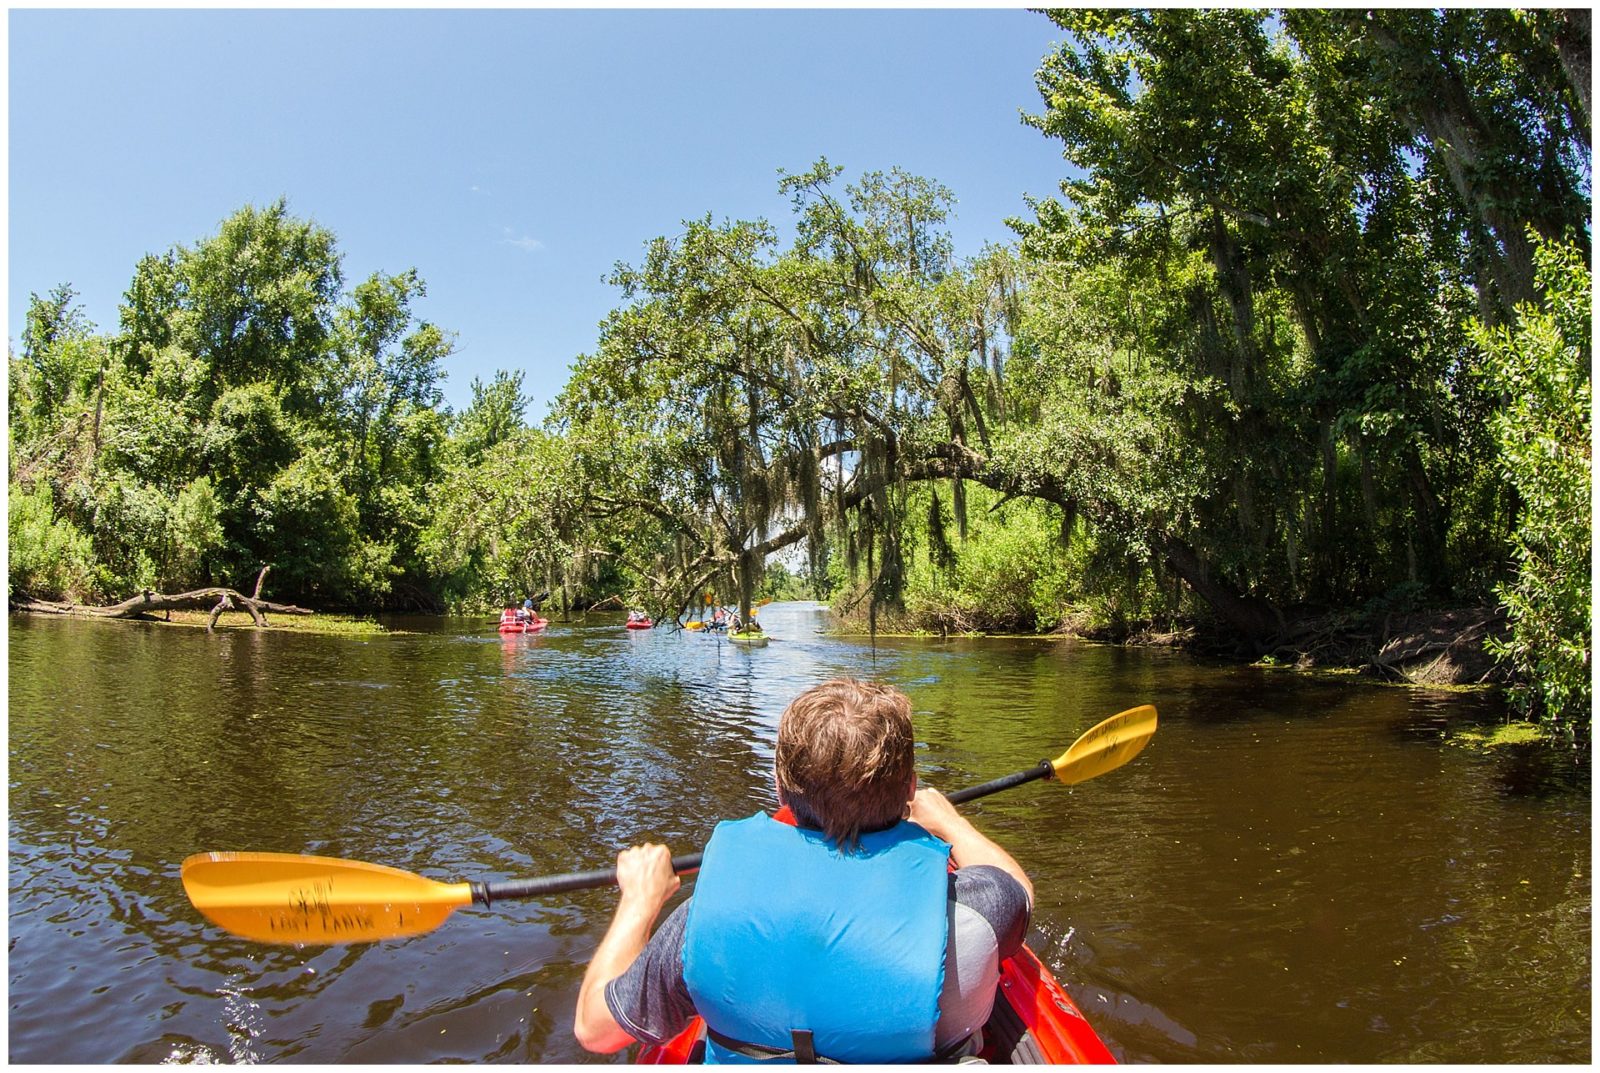 Kayak Swamp Tour Adventure with Louisiana Lost Lands Environmental Tours in New Orleans, LA